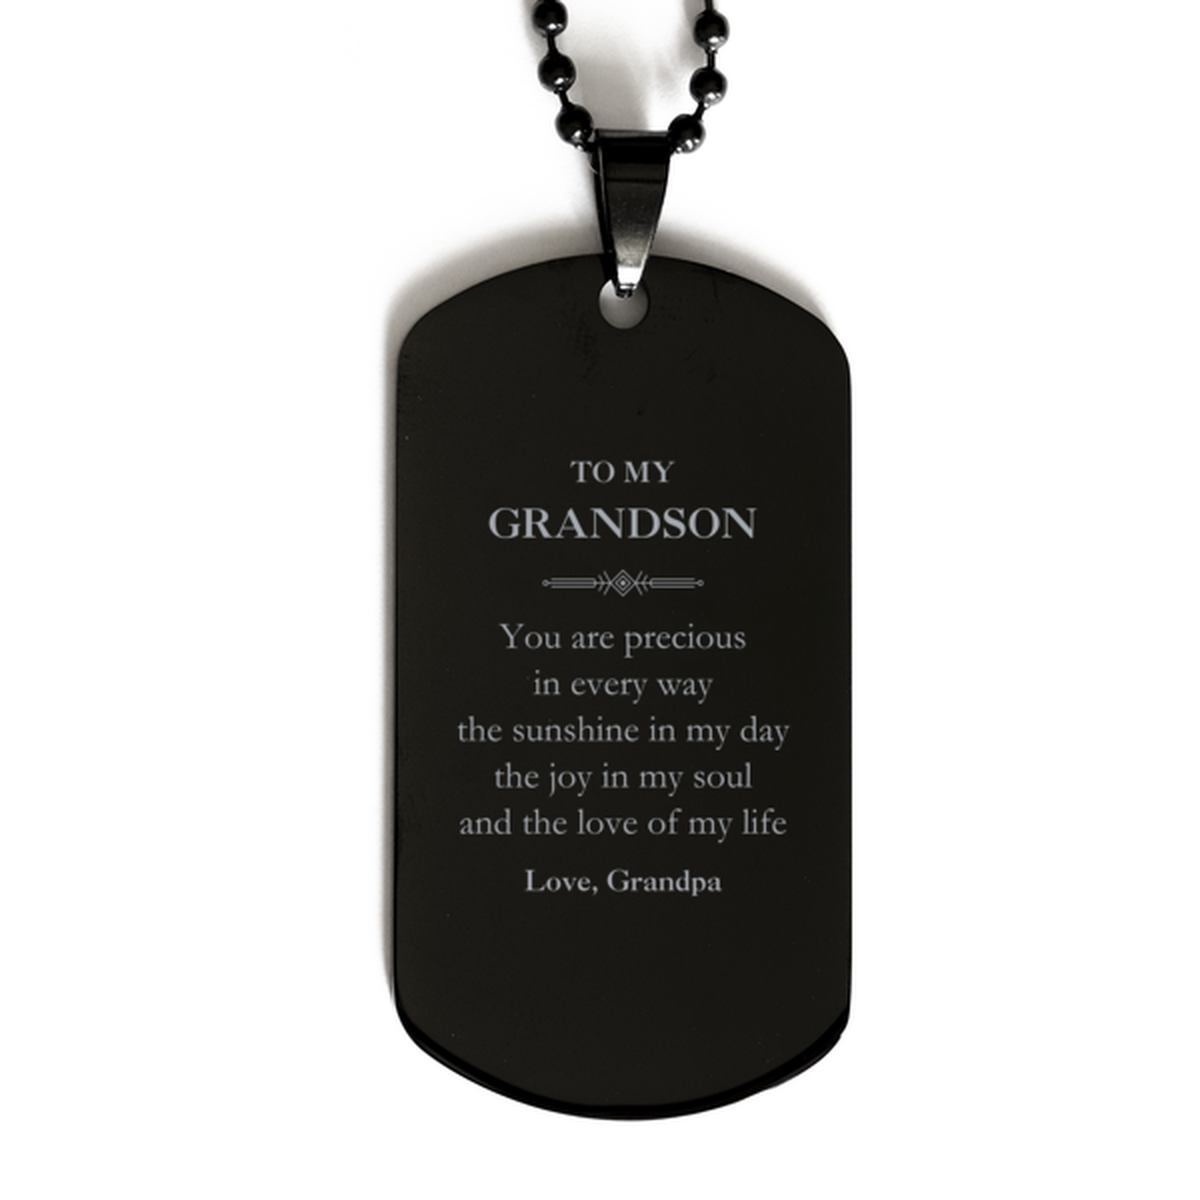 Graduation Gifts for Grandson Black Dog Tag Present from Grandpa, Christmas Grandson Birthday Gifts Grandson You are precious in every way the sunshine in my day. Love, Grandpa